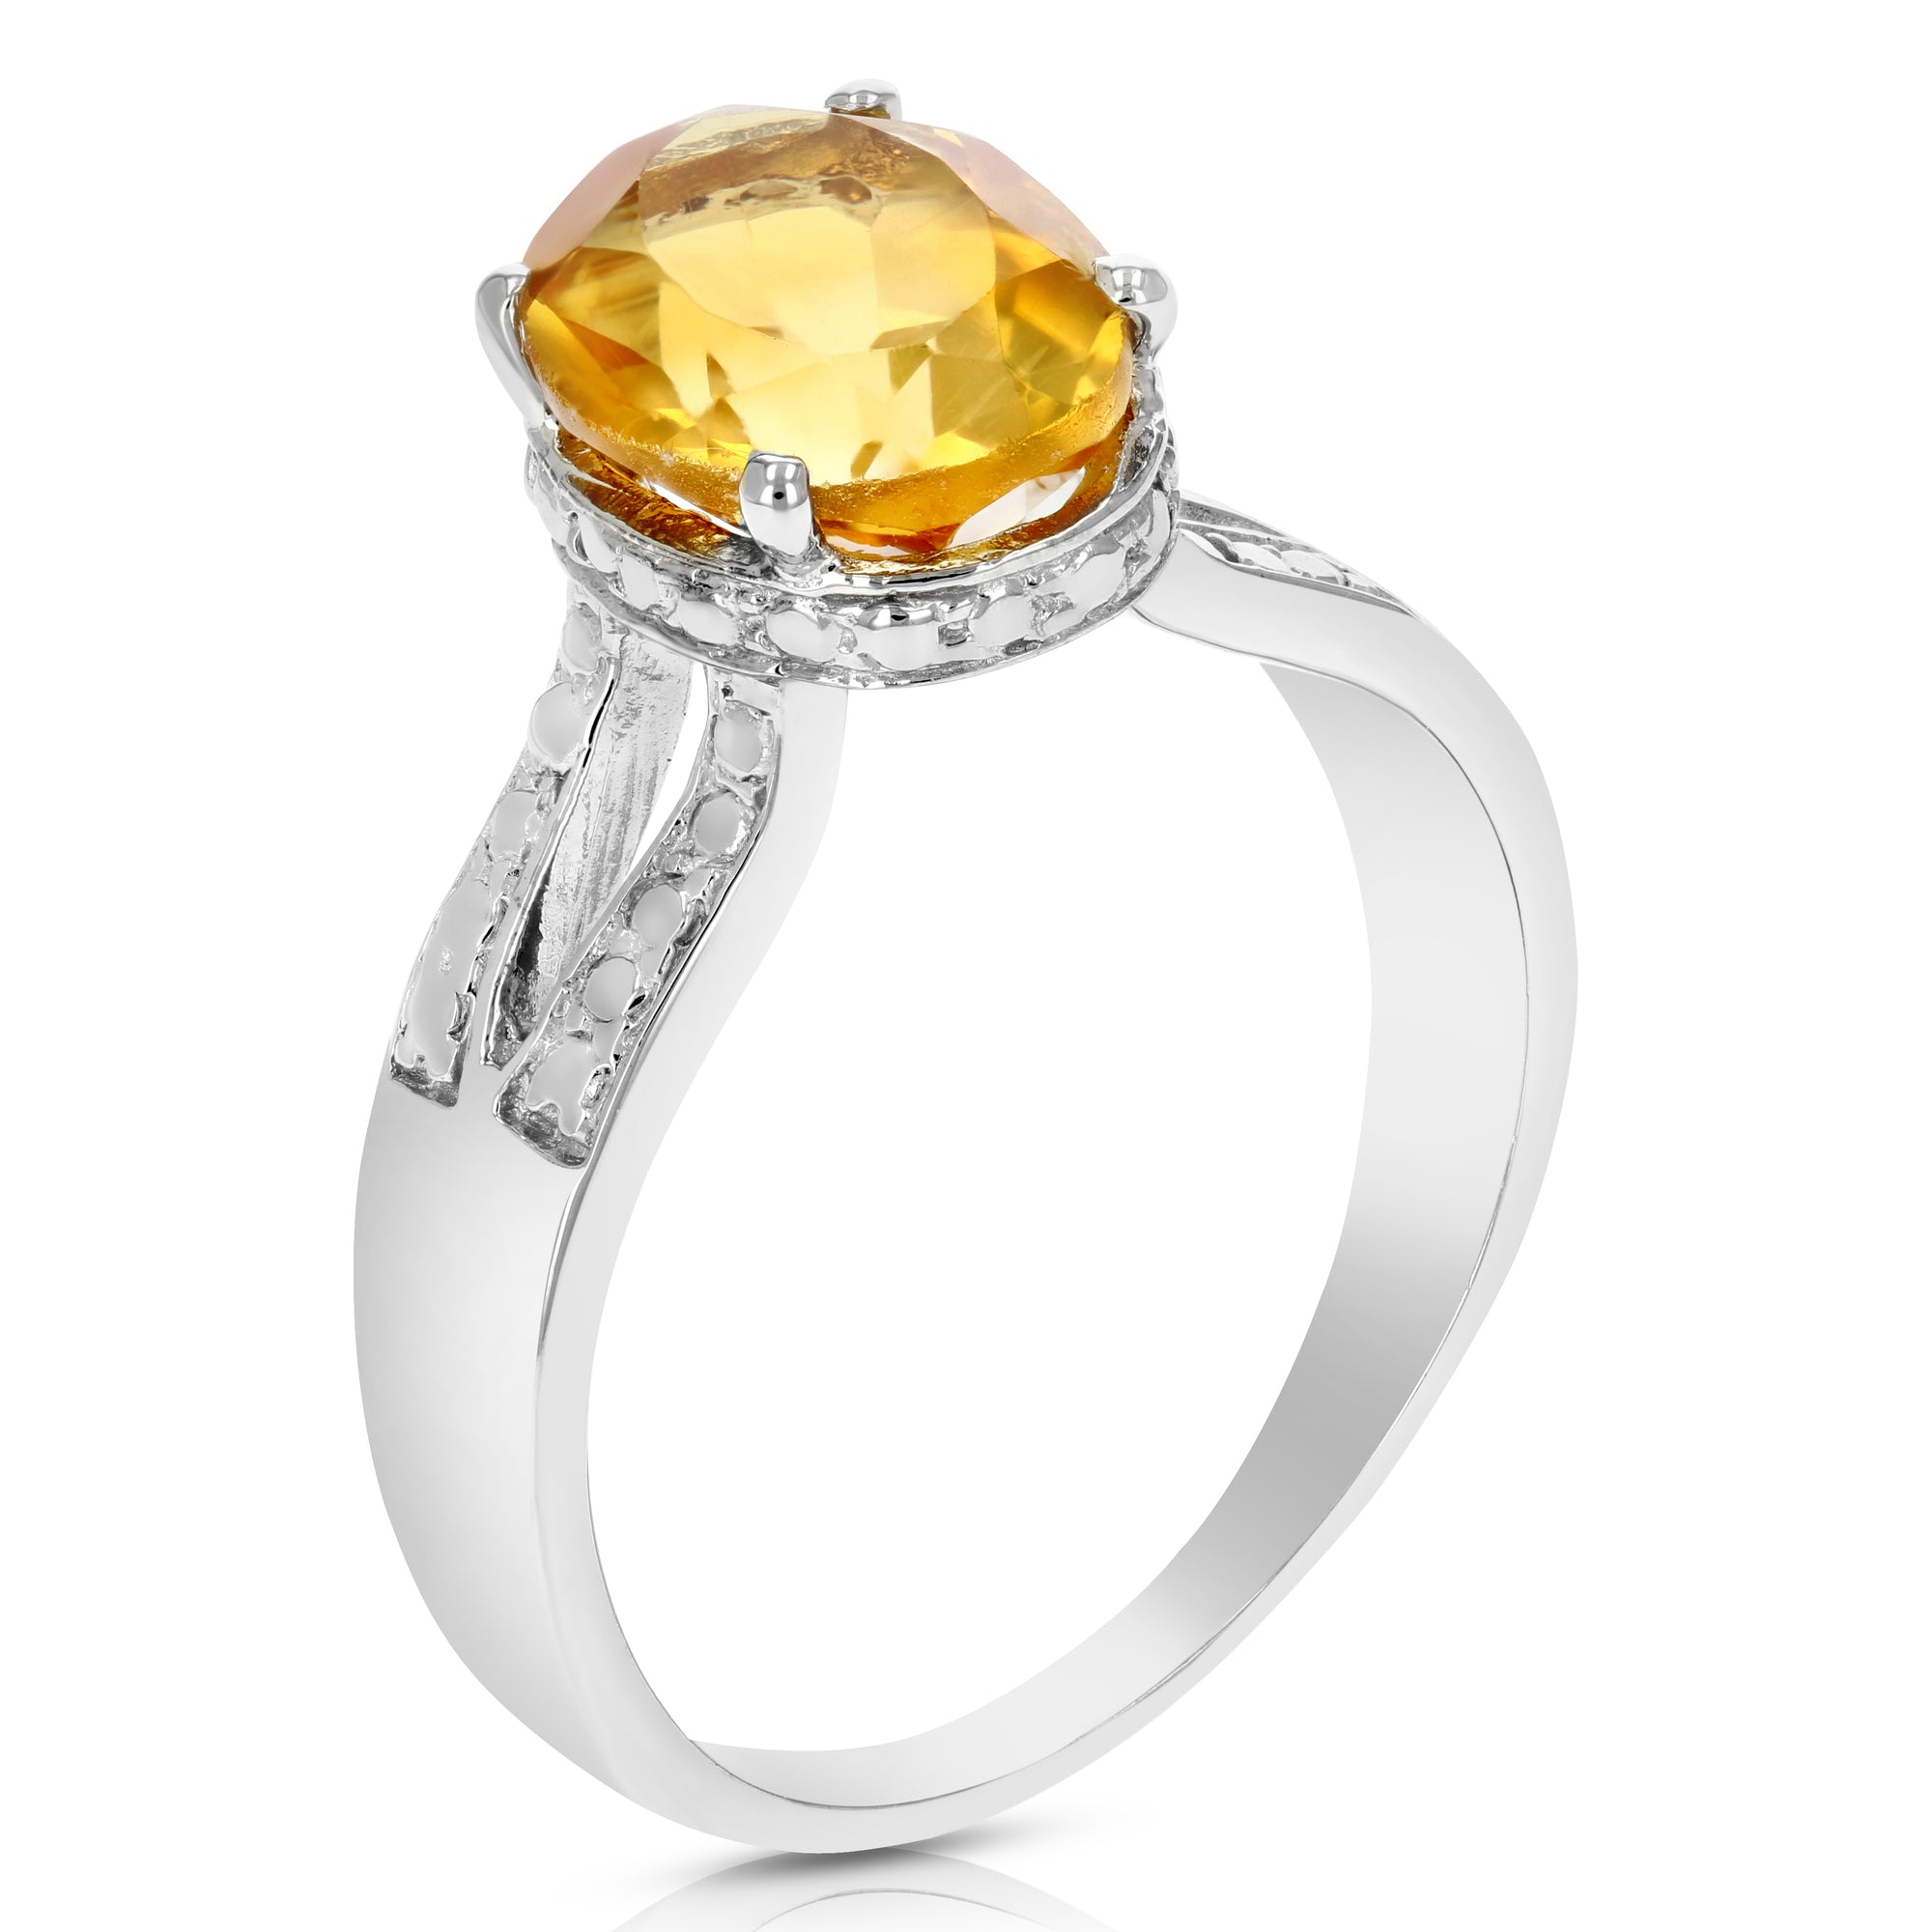 2 cttw Citrine Ring in .925 Sterling Silver with Rhodium Plating Oval Shape